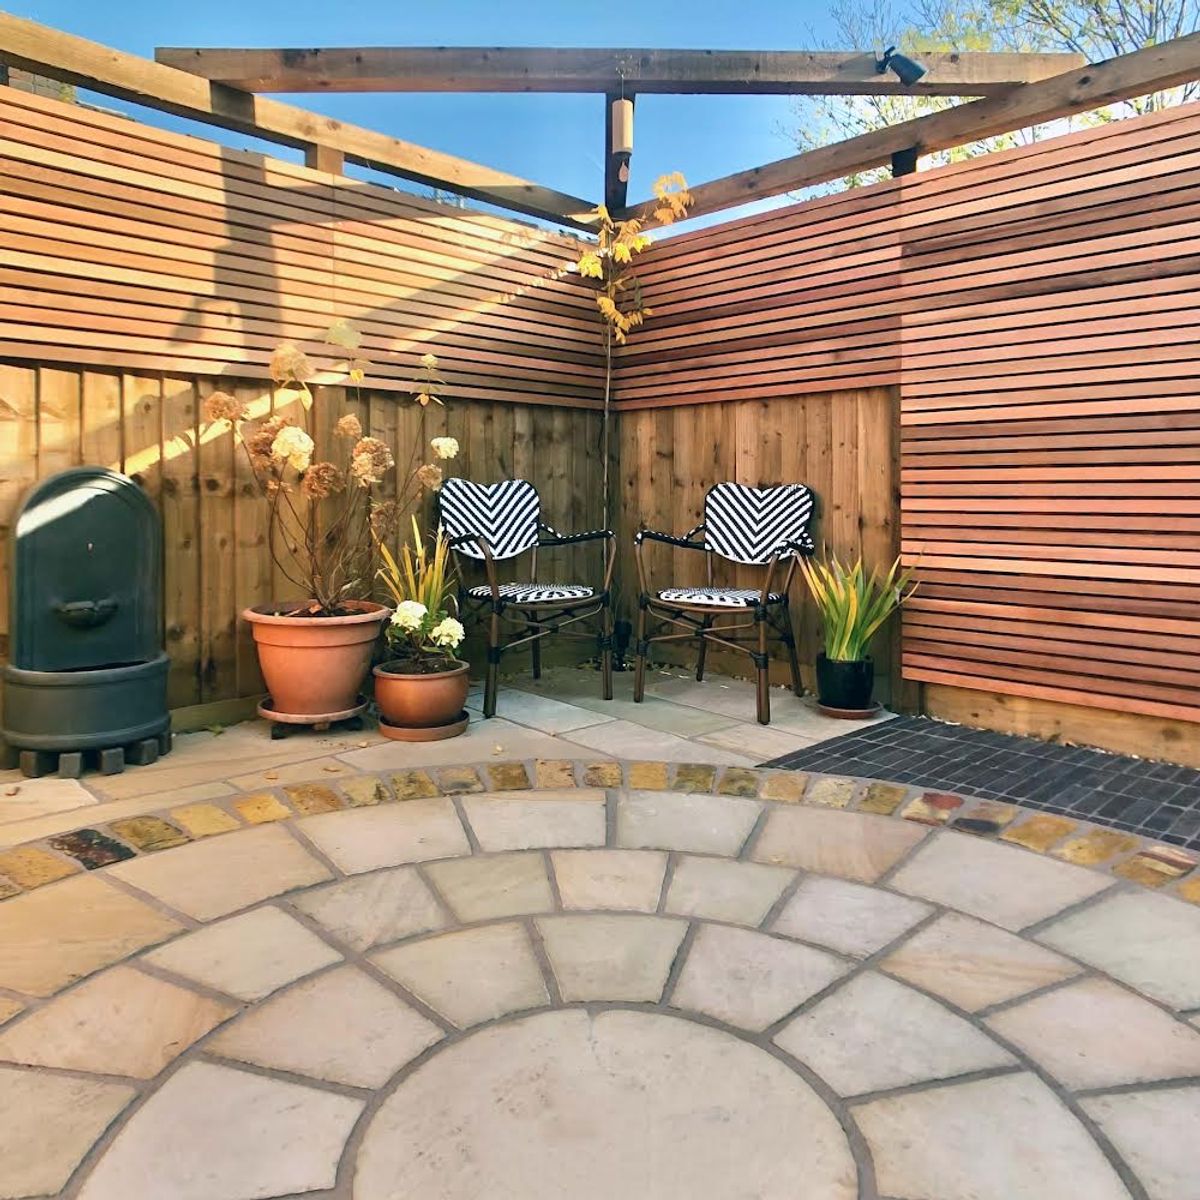 Detail of Seating Area with Triangular Oak Pergola and Cedar Fencing Part of Back Yard Design in Dalston North London